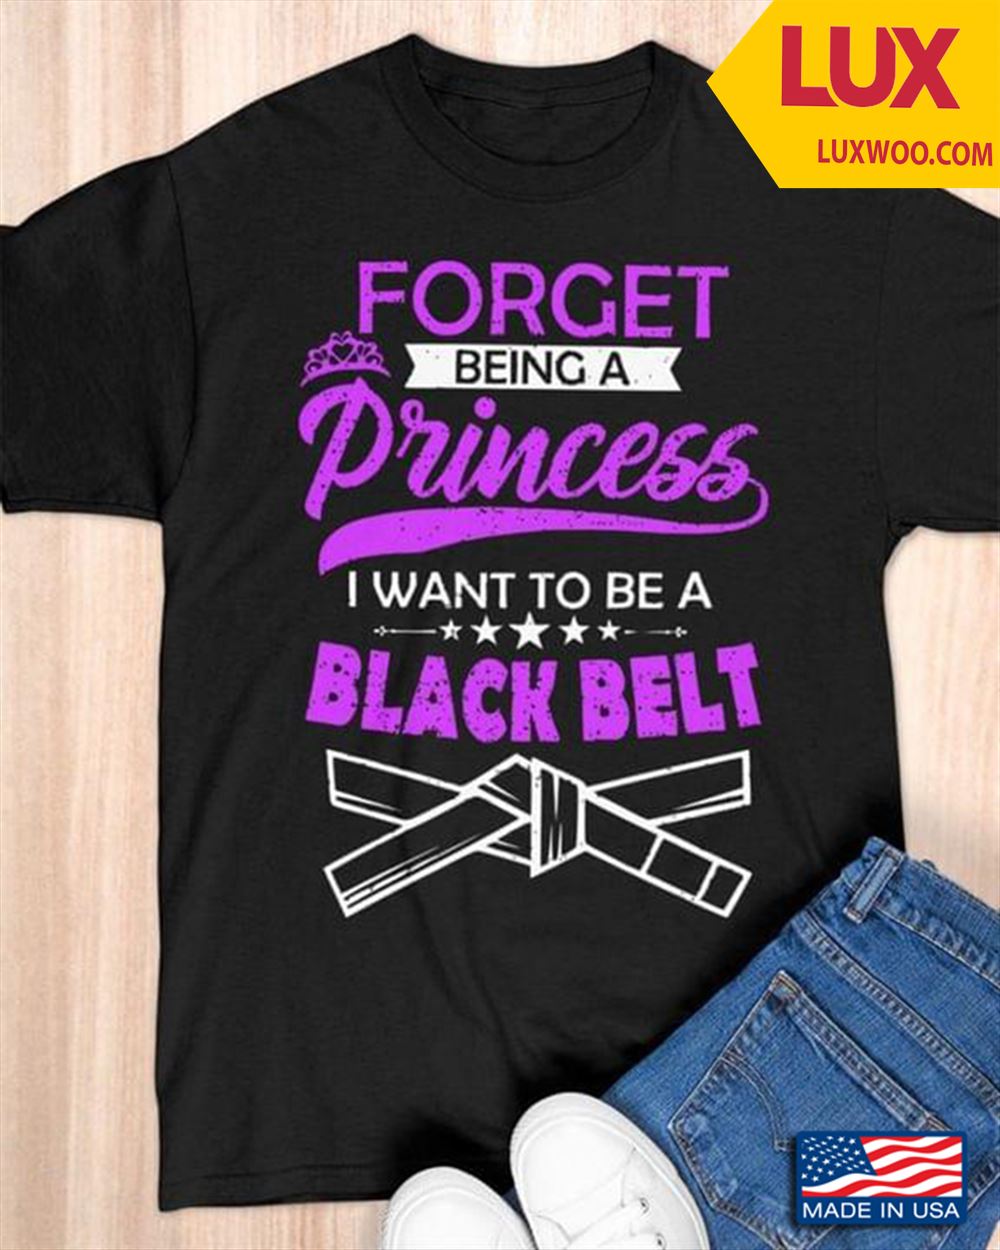 Forget Being A Princess I Want To Be A Black Belt Tshirt Size Up To 5xl